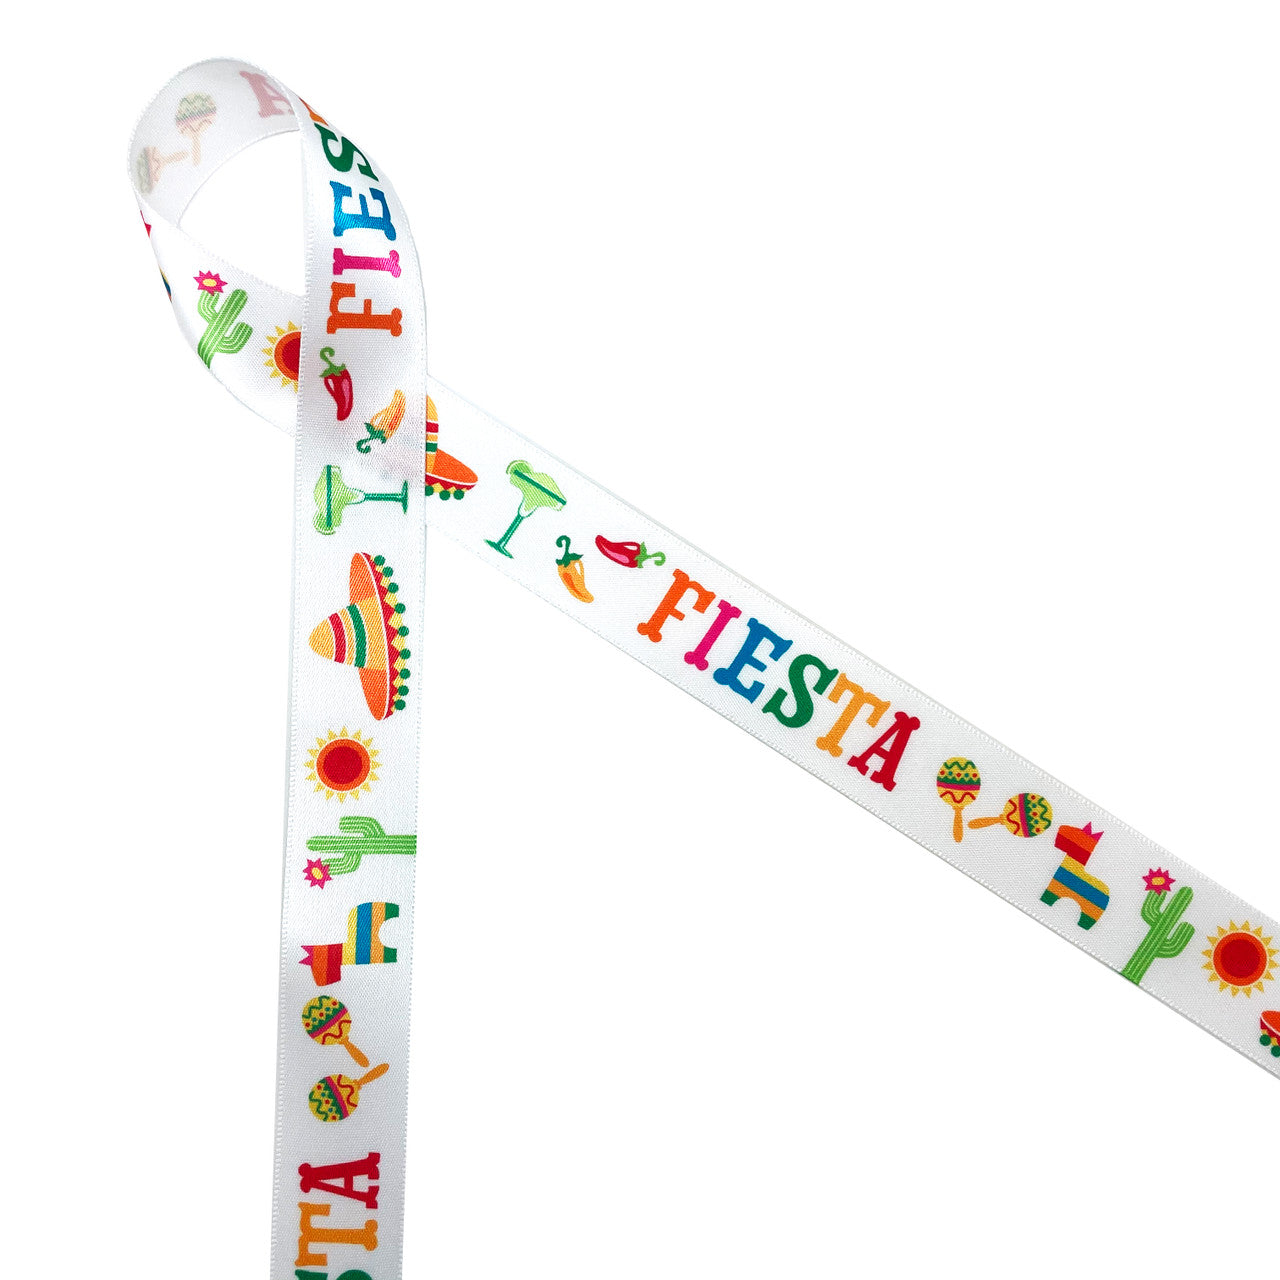 Fiesta in pink, orange, blue, yellow and red with maracas, sombreros, chili peppers, pinatas, and margaritas printed on 7/8" white single face satin ribbon is perfect for Cinco De Mayo celebrations! This is a great ribbon for party decor, Southwestern themed parties and lots of Summer fun! All our ribbon is designed and printed in the USA